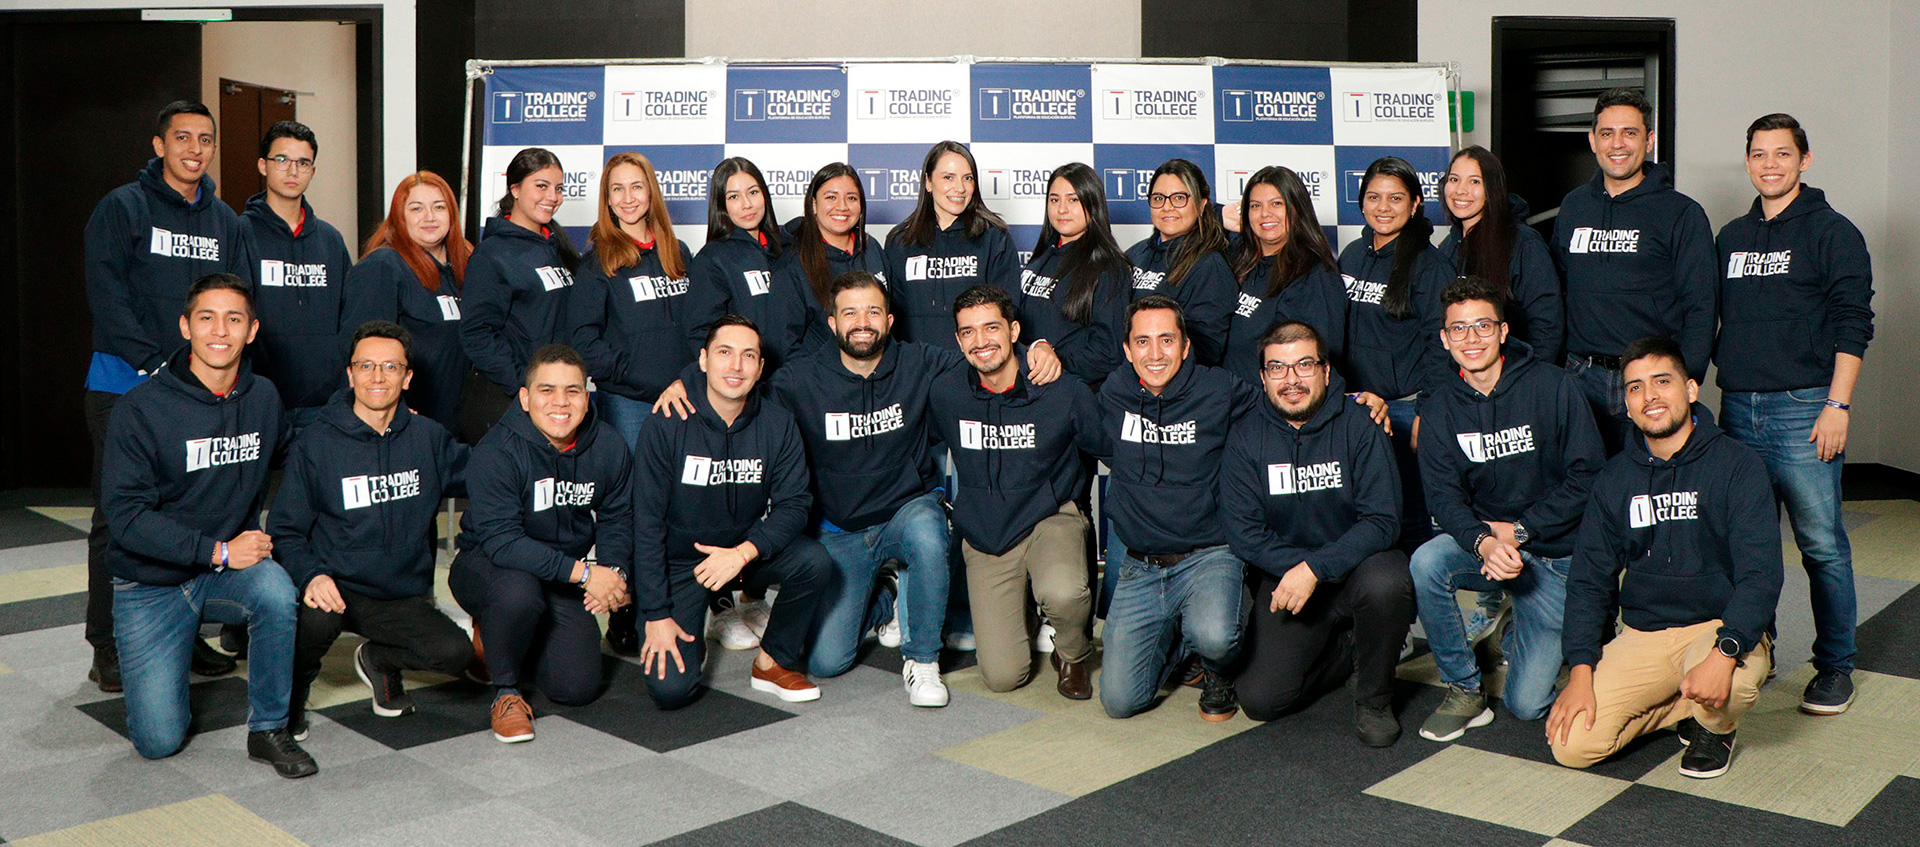 Equipo-Trading-College